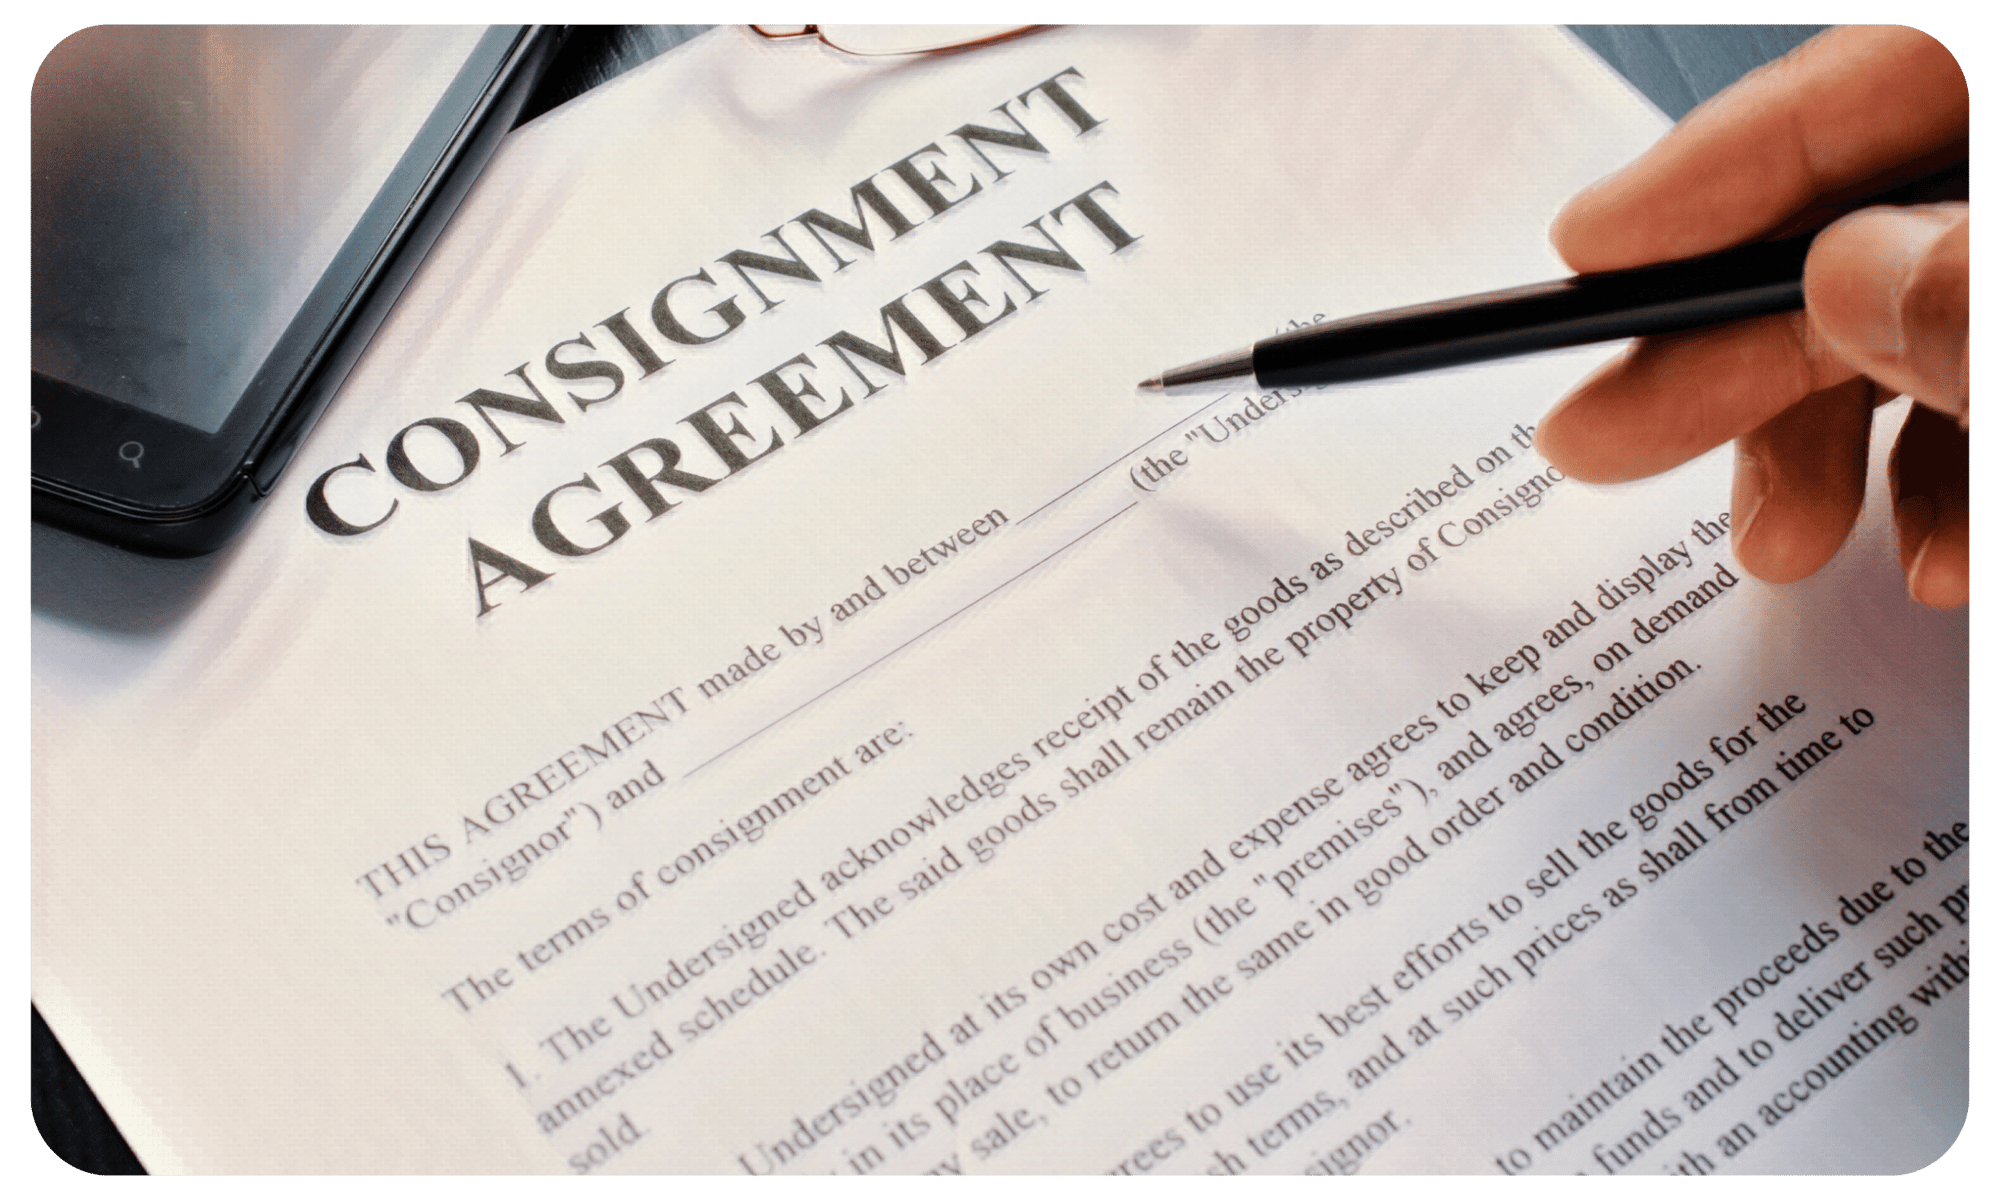 Consignment-contract-Agreement-with-consignor-fees